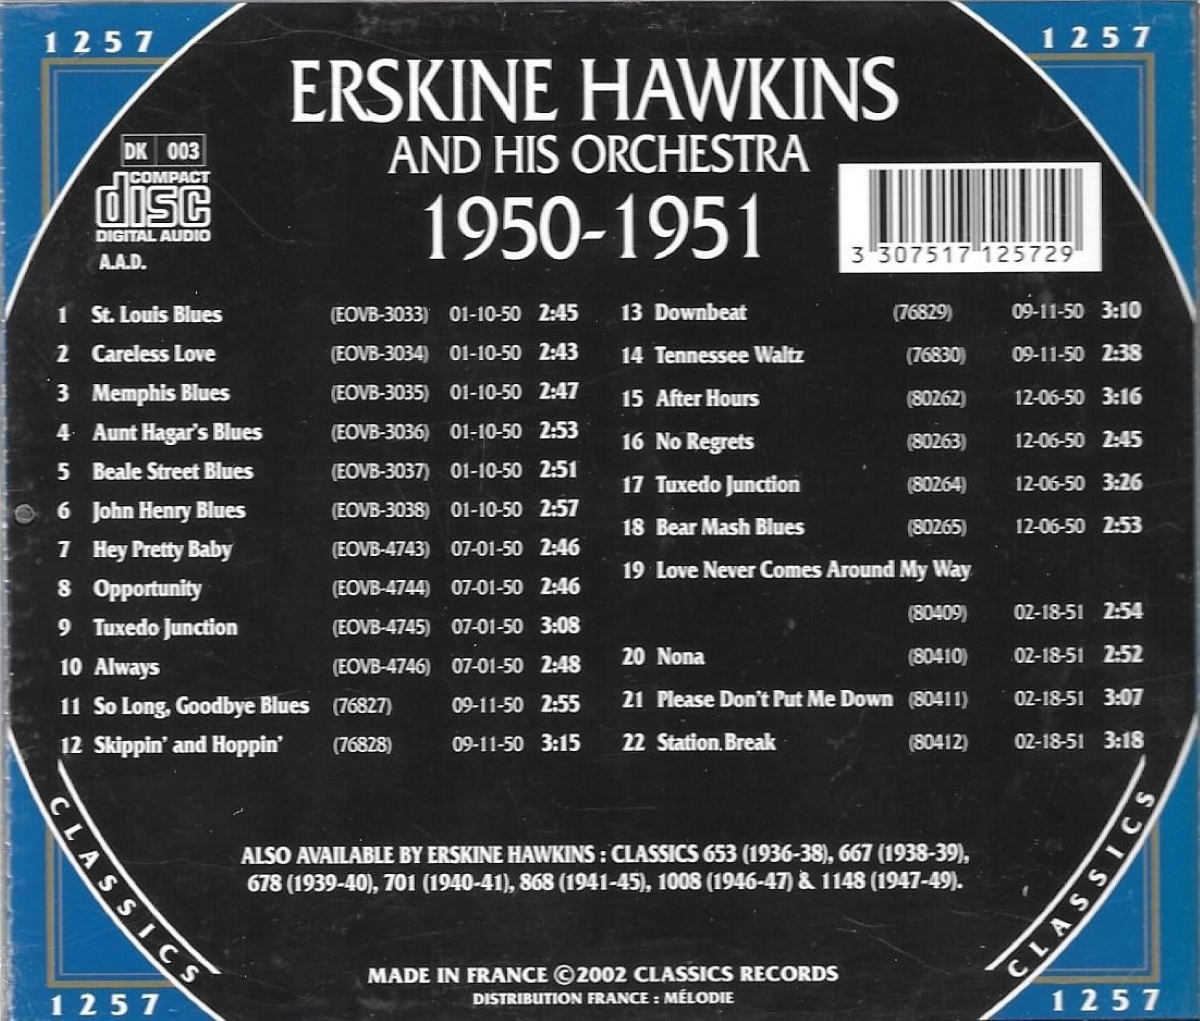 The Chronological Erskine Hawkins and His Orchestra-1950-1951